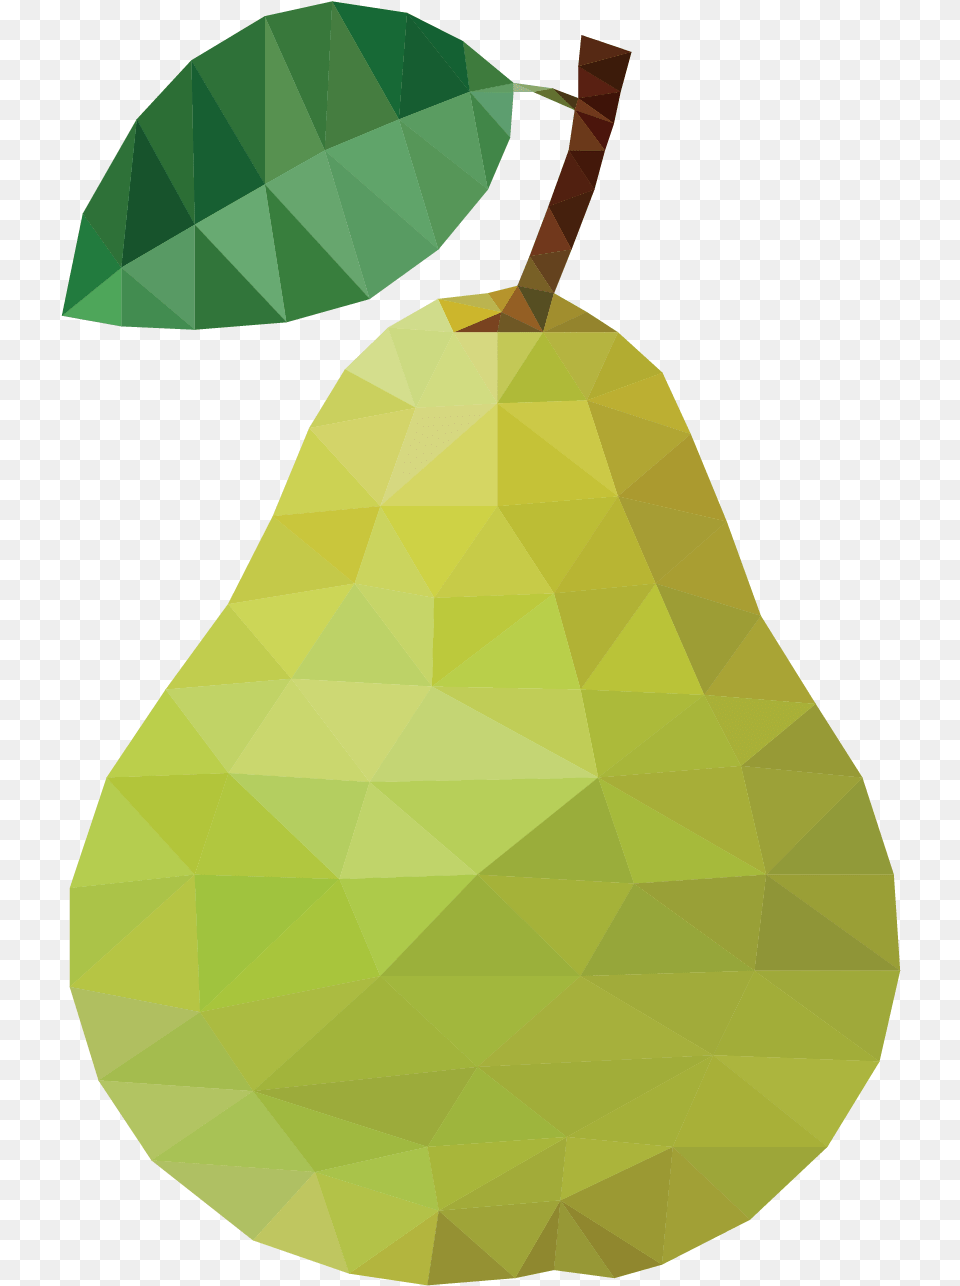 Pear Euclidean Vector Fruit Auglis Fruits In Geometrical Shapes, Food, Plant, Produce, Person Png Image